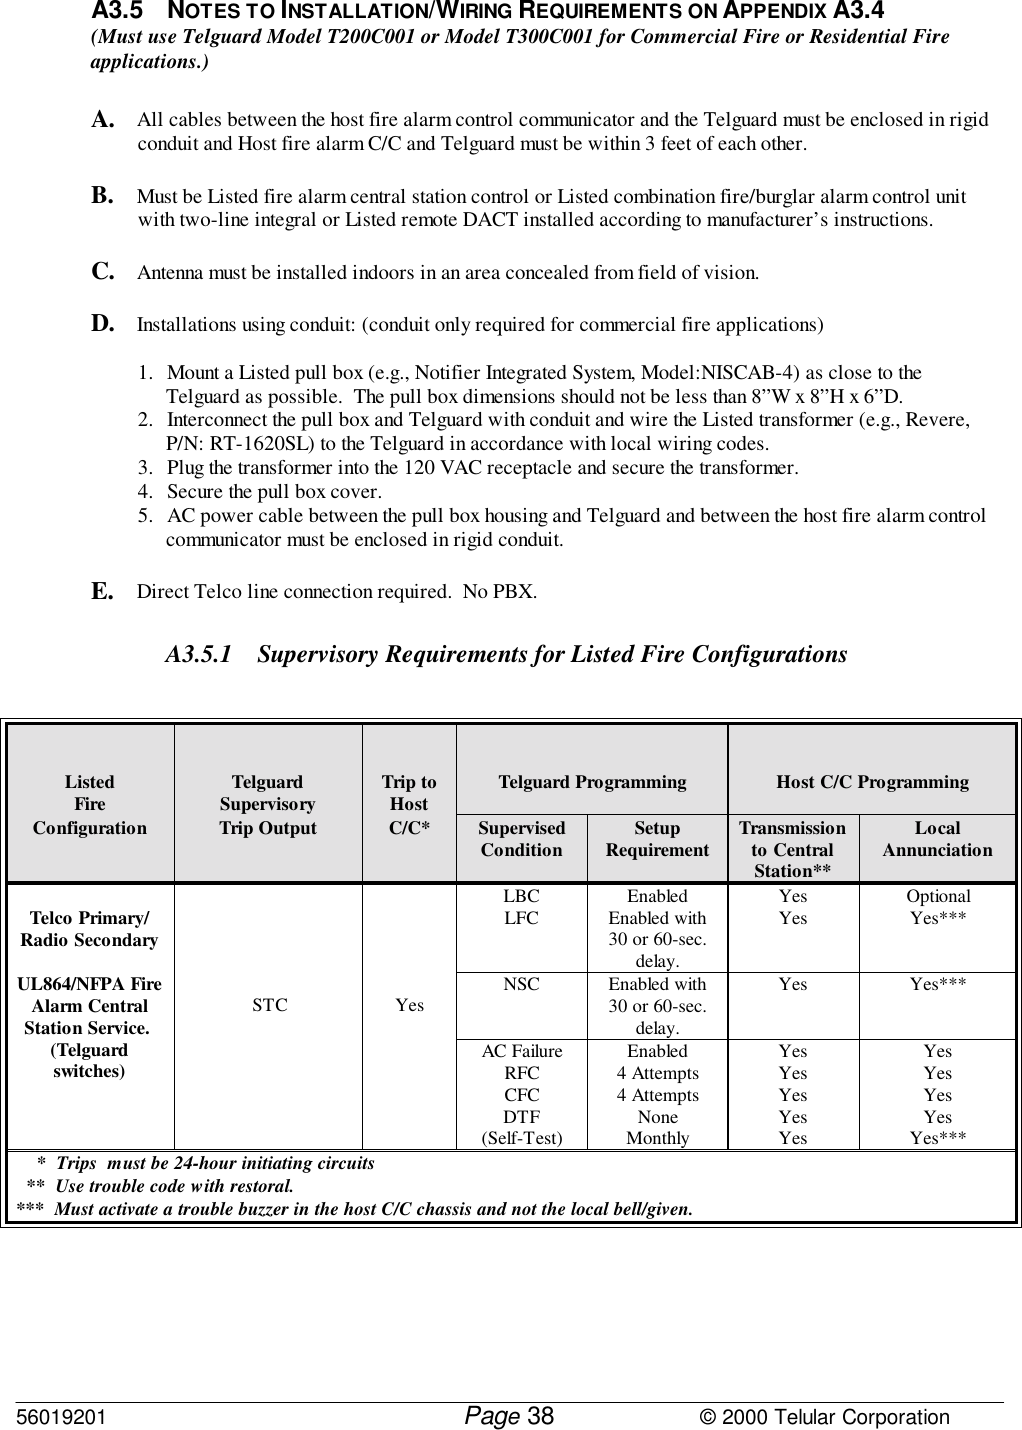 56019201         Page                             © 2000 Telular Corporation38A3.5 NOTES TO INSTALLATION/WIRING REQUIREMENTS ON APPENDIX A3.4(Must use Telguard Model T200C001 or Model T300C001 for Commercial Fire or Residential Fireapplications.)A. All cables between the host fire alarm control communicator and the Telguard must be enclosed in rigidconduit and Host fire alarm C/C and Telguard must be within 3 feet of each other.B. Must be Listed fire alarm central station control or Listed combination fire/burglar alarm control unitwith two-line integral or Listed remote DACT installed according to manufacturer’s instructions.C. Antenna must be installed indoors in an area concealed from field of vision.D. Installations using conduit: (conduit only required for commercial fire applications)1. Mount a Listed pull box (e.g., Notifier Integrated System, Model:NISCAB-4) as close to theTelguard as possible.  The pull box dimensions should not be less than 8”W x 8”H x 6”D.2. Interconnect the pull box and Telguard with conduit and wire the Listed transformer (e.g., Revere,P/N: RT-1620SL) to the Telguard in accordance with local wiring codes.3. Plug the transformer into the 120 VAC receptacle and secure the transformer. 4. Secure the pull box cover.5. AC power cable between the pull box housing and Telguard and between the host fire alarm controlcommunicator must be enclosed in rigid conduit. E. Direct Telco line connection required.  No PBX.A3.5.1 Supervisory Requirements for Listed Fire ConfigurationsListedFire TelguardSupervisory Trip toHost Telguard Programming Host C/C ProgrammingConfiguration Trip Output C/C* SupervisedCondition SetupRequirement Transmissionto CentralStation**LocalAnnunciationLBCLFC EnabledEnabled with30 or 60-sec.delay.YesYes OptionalYes***NSC Enabled with30 or 60-sec.delay.Yes Yes***Telco Primary/Radio SecondaryUL864/NFPA FireAlarm CentralStation Service. (Telguardswitches) STC YesAC FailureRFCCFCDTF(Self-Test)Enabled4 Attempts4 AttemptsNoneMonthlyYesYesYesYesYesYesYesYesYesYes***    *  Trips  must be 24-hour initiating circuits  **  Use trouble code with restoral.***  Must activate a trouble buzzer in the host C/C chassis and not the local bell/given.